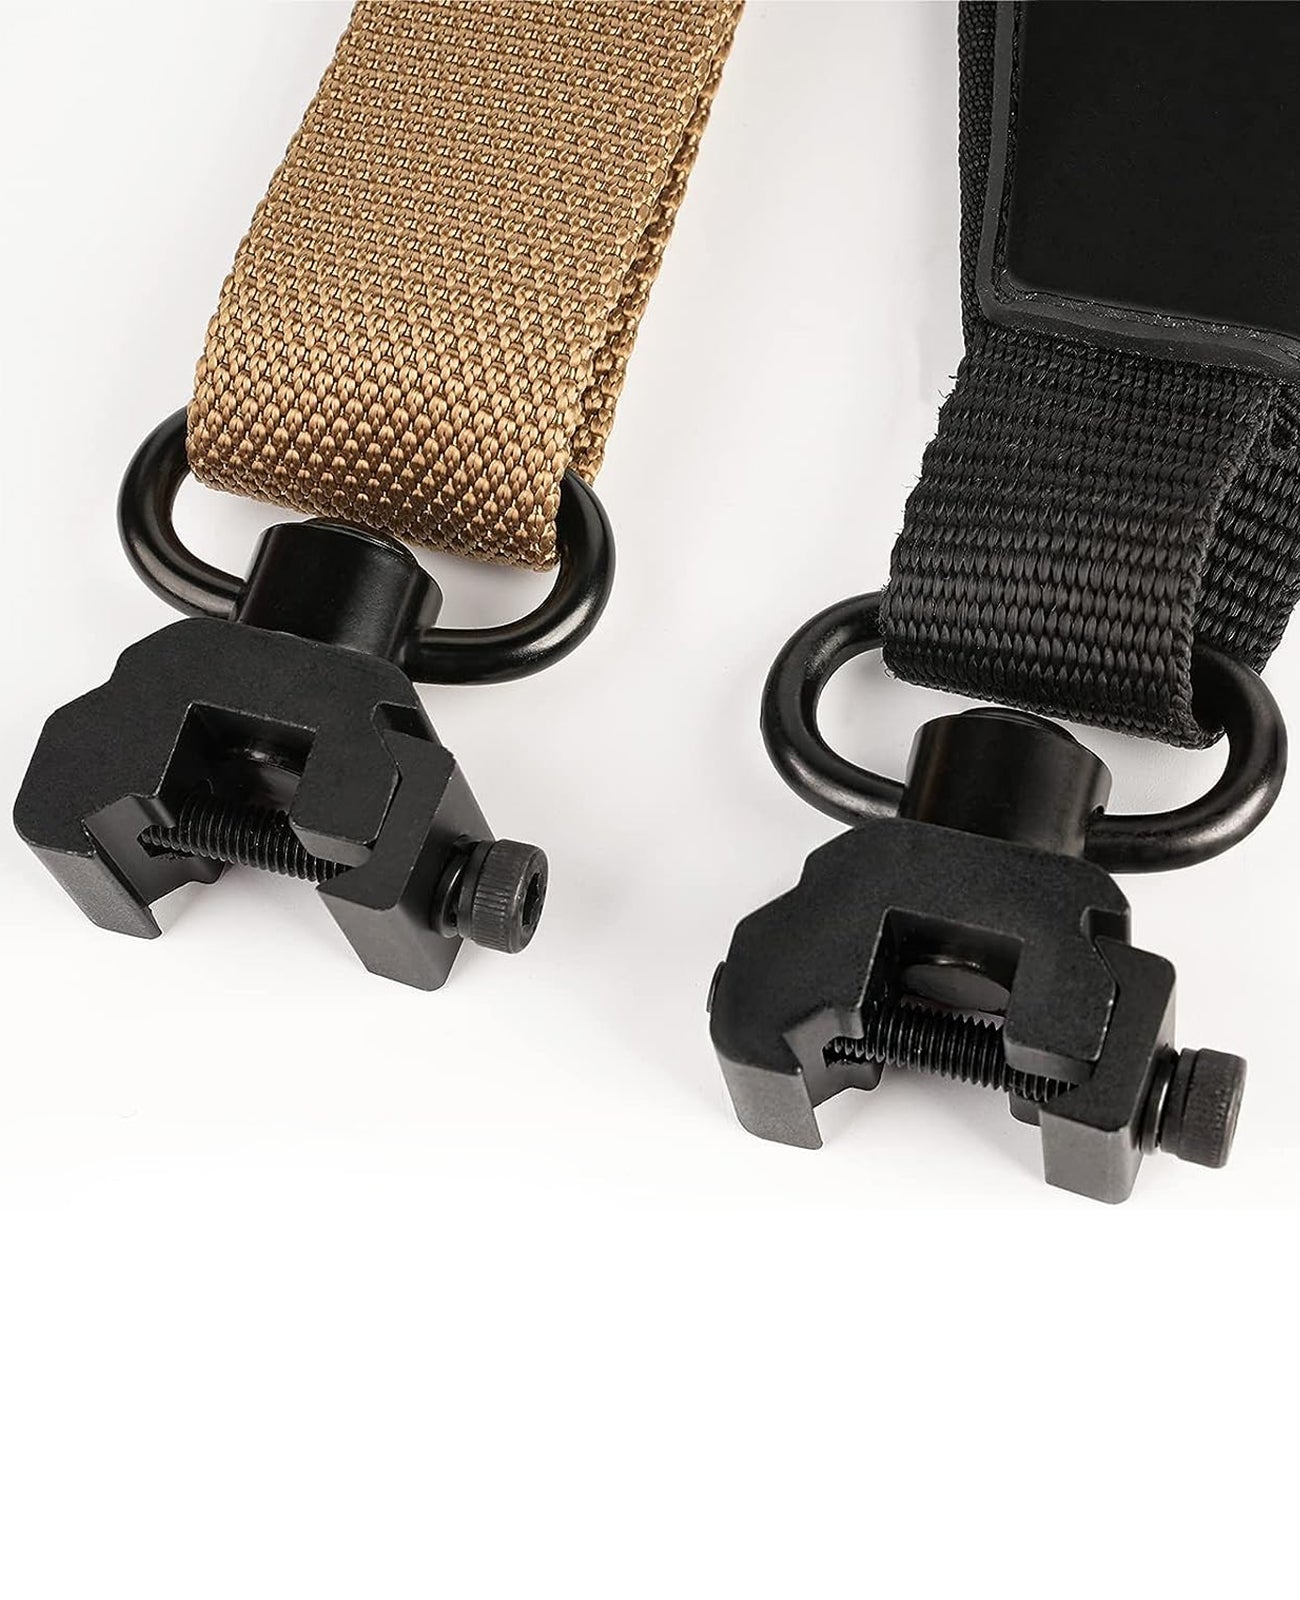 360° Rotation Picatinny Rail Sling Attachment for 2 Point Sling